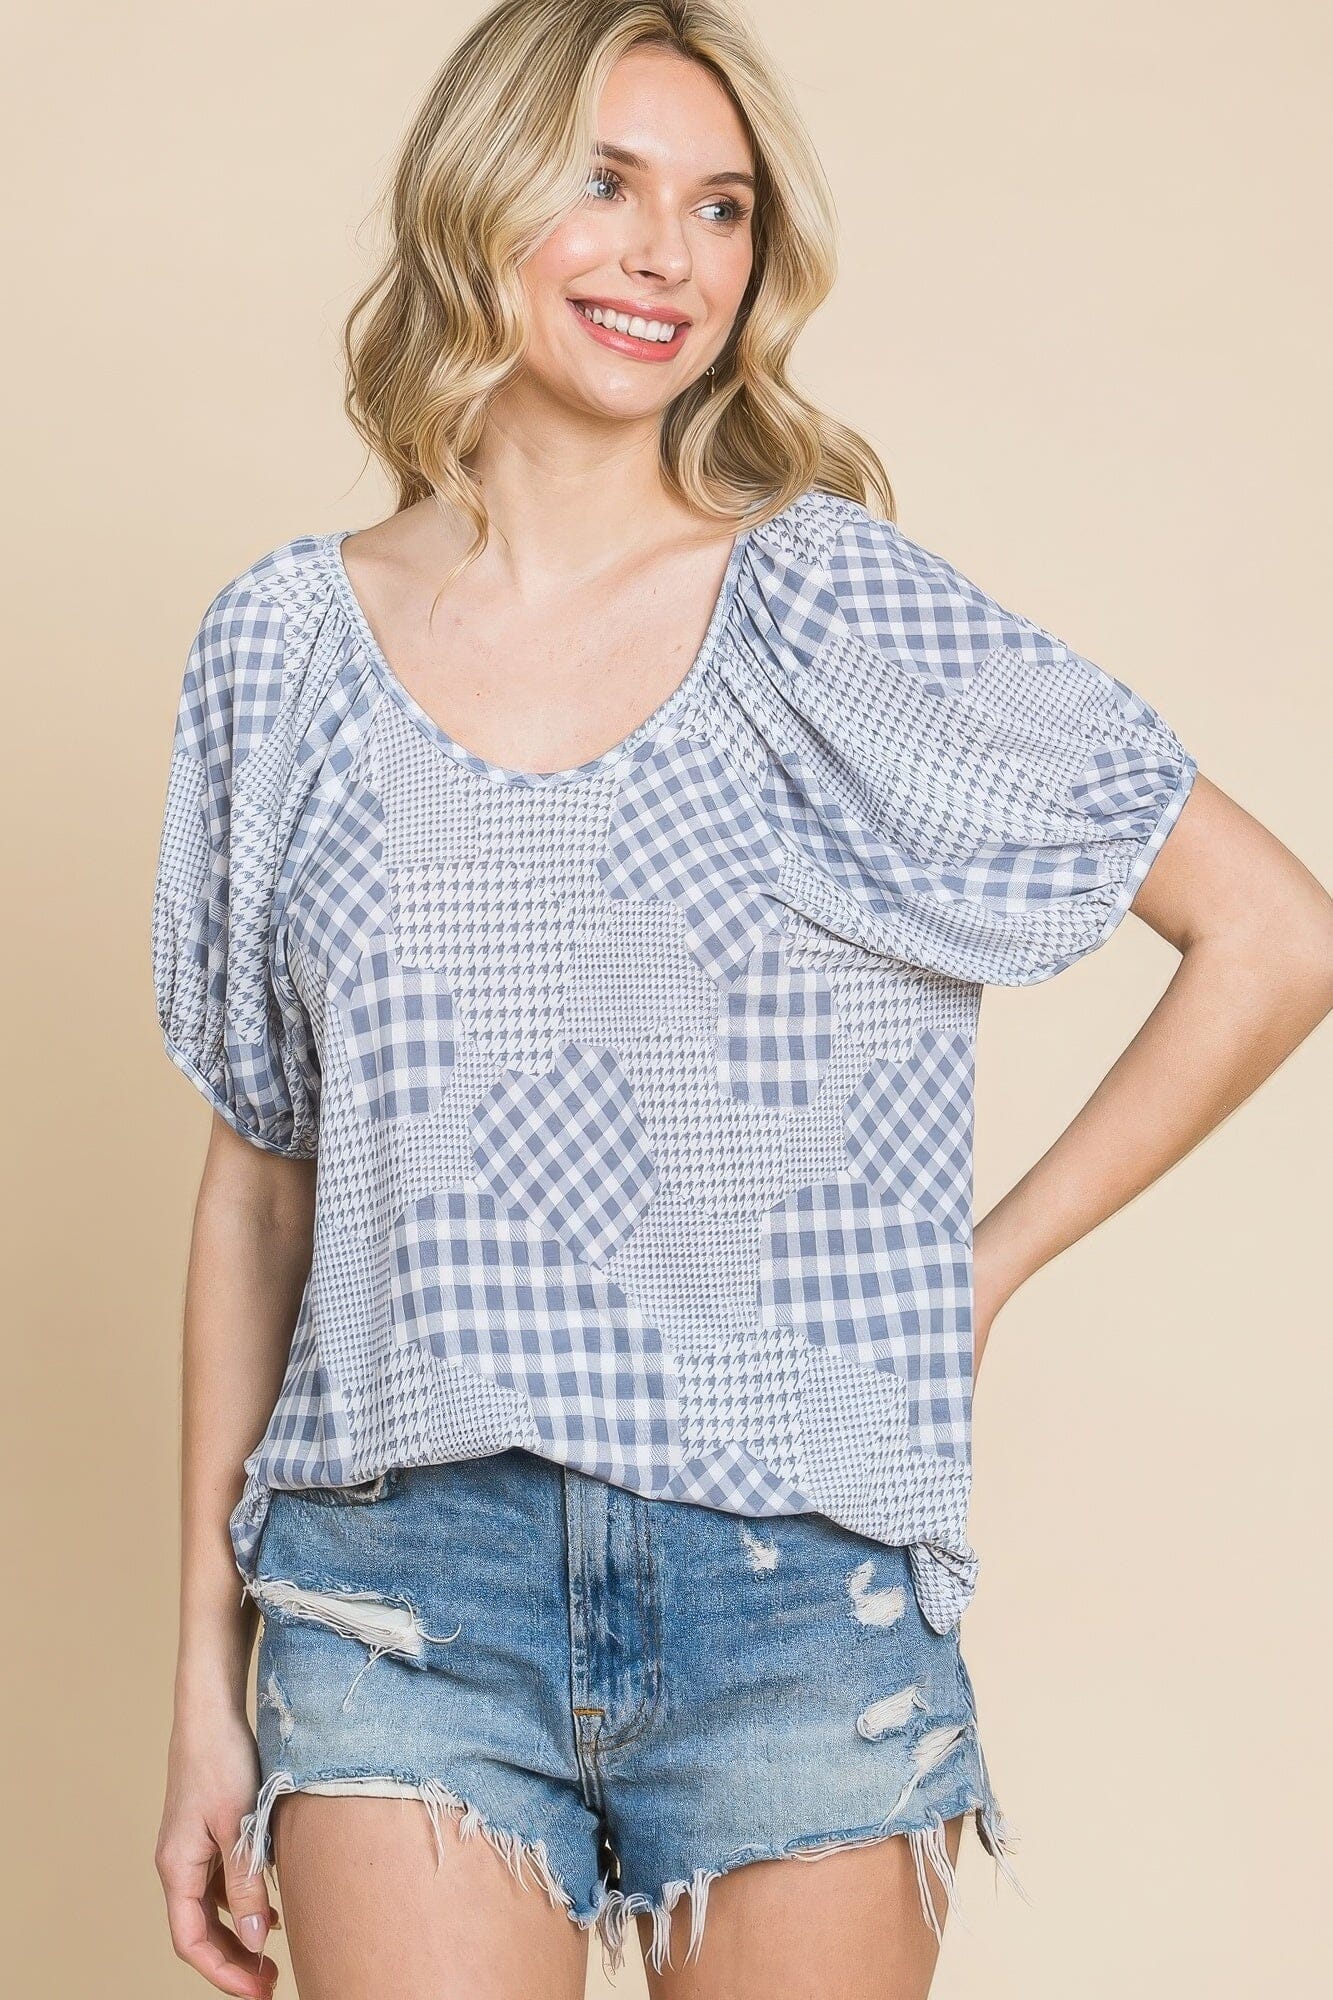 Grey Check Plaid Short Bubble Sleeves Round Neck Top Shirts & Tops jehouze 